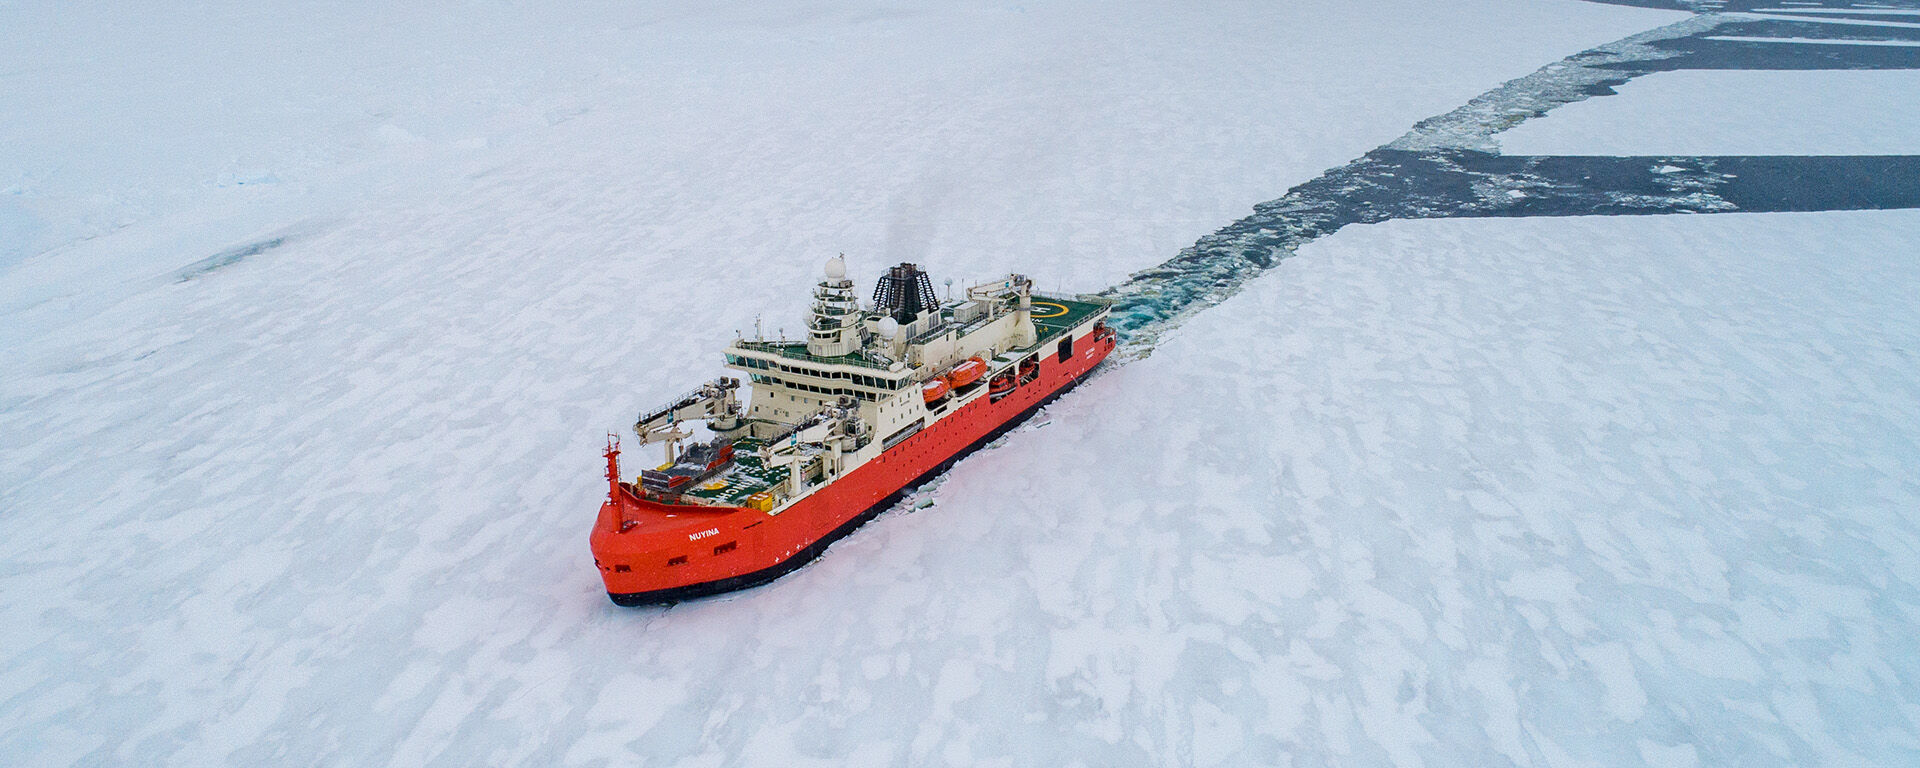 An aerial drone photo of an orange and white ship breaking through sea ice. There is a long channel of water behind the ship where it has broken a path through.